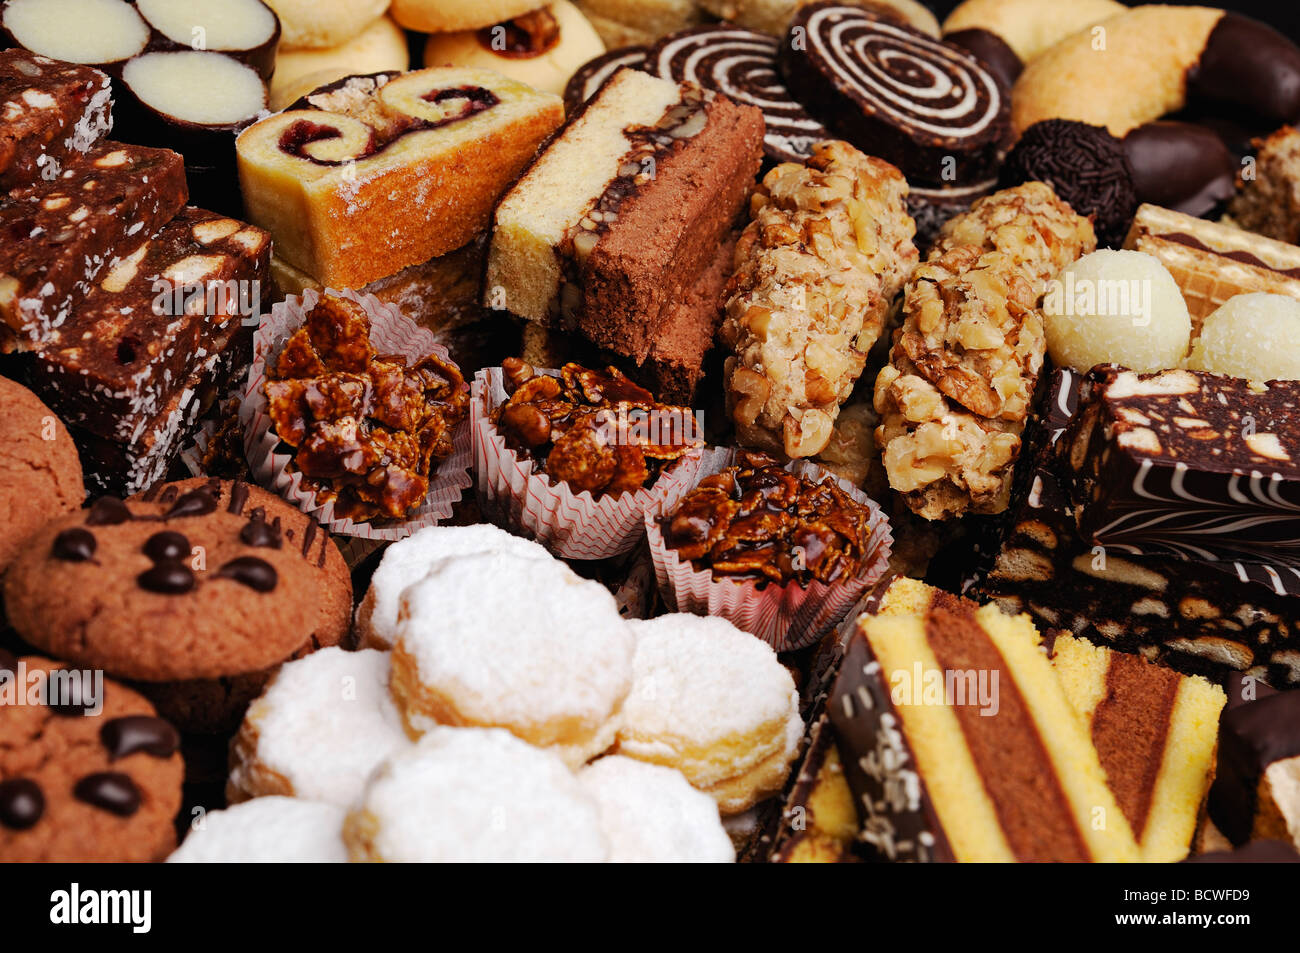 Cakes and Biscuits Stock Photo